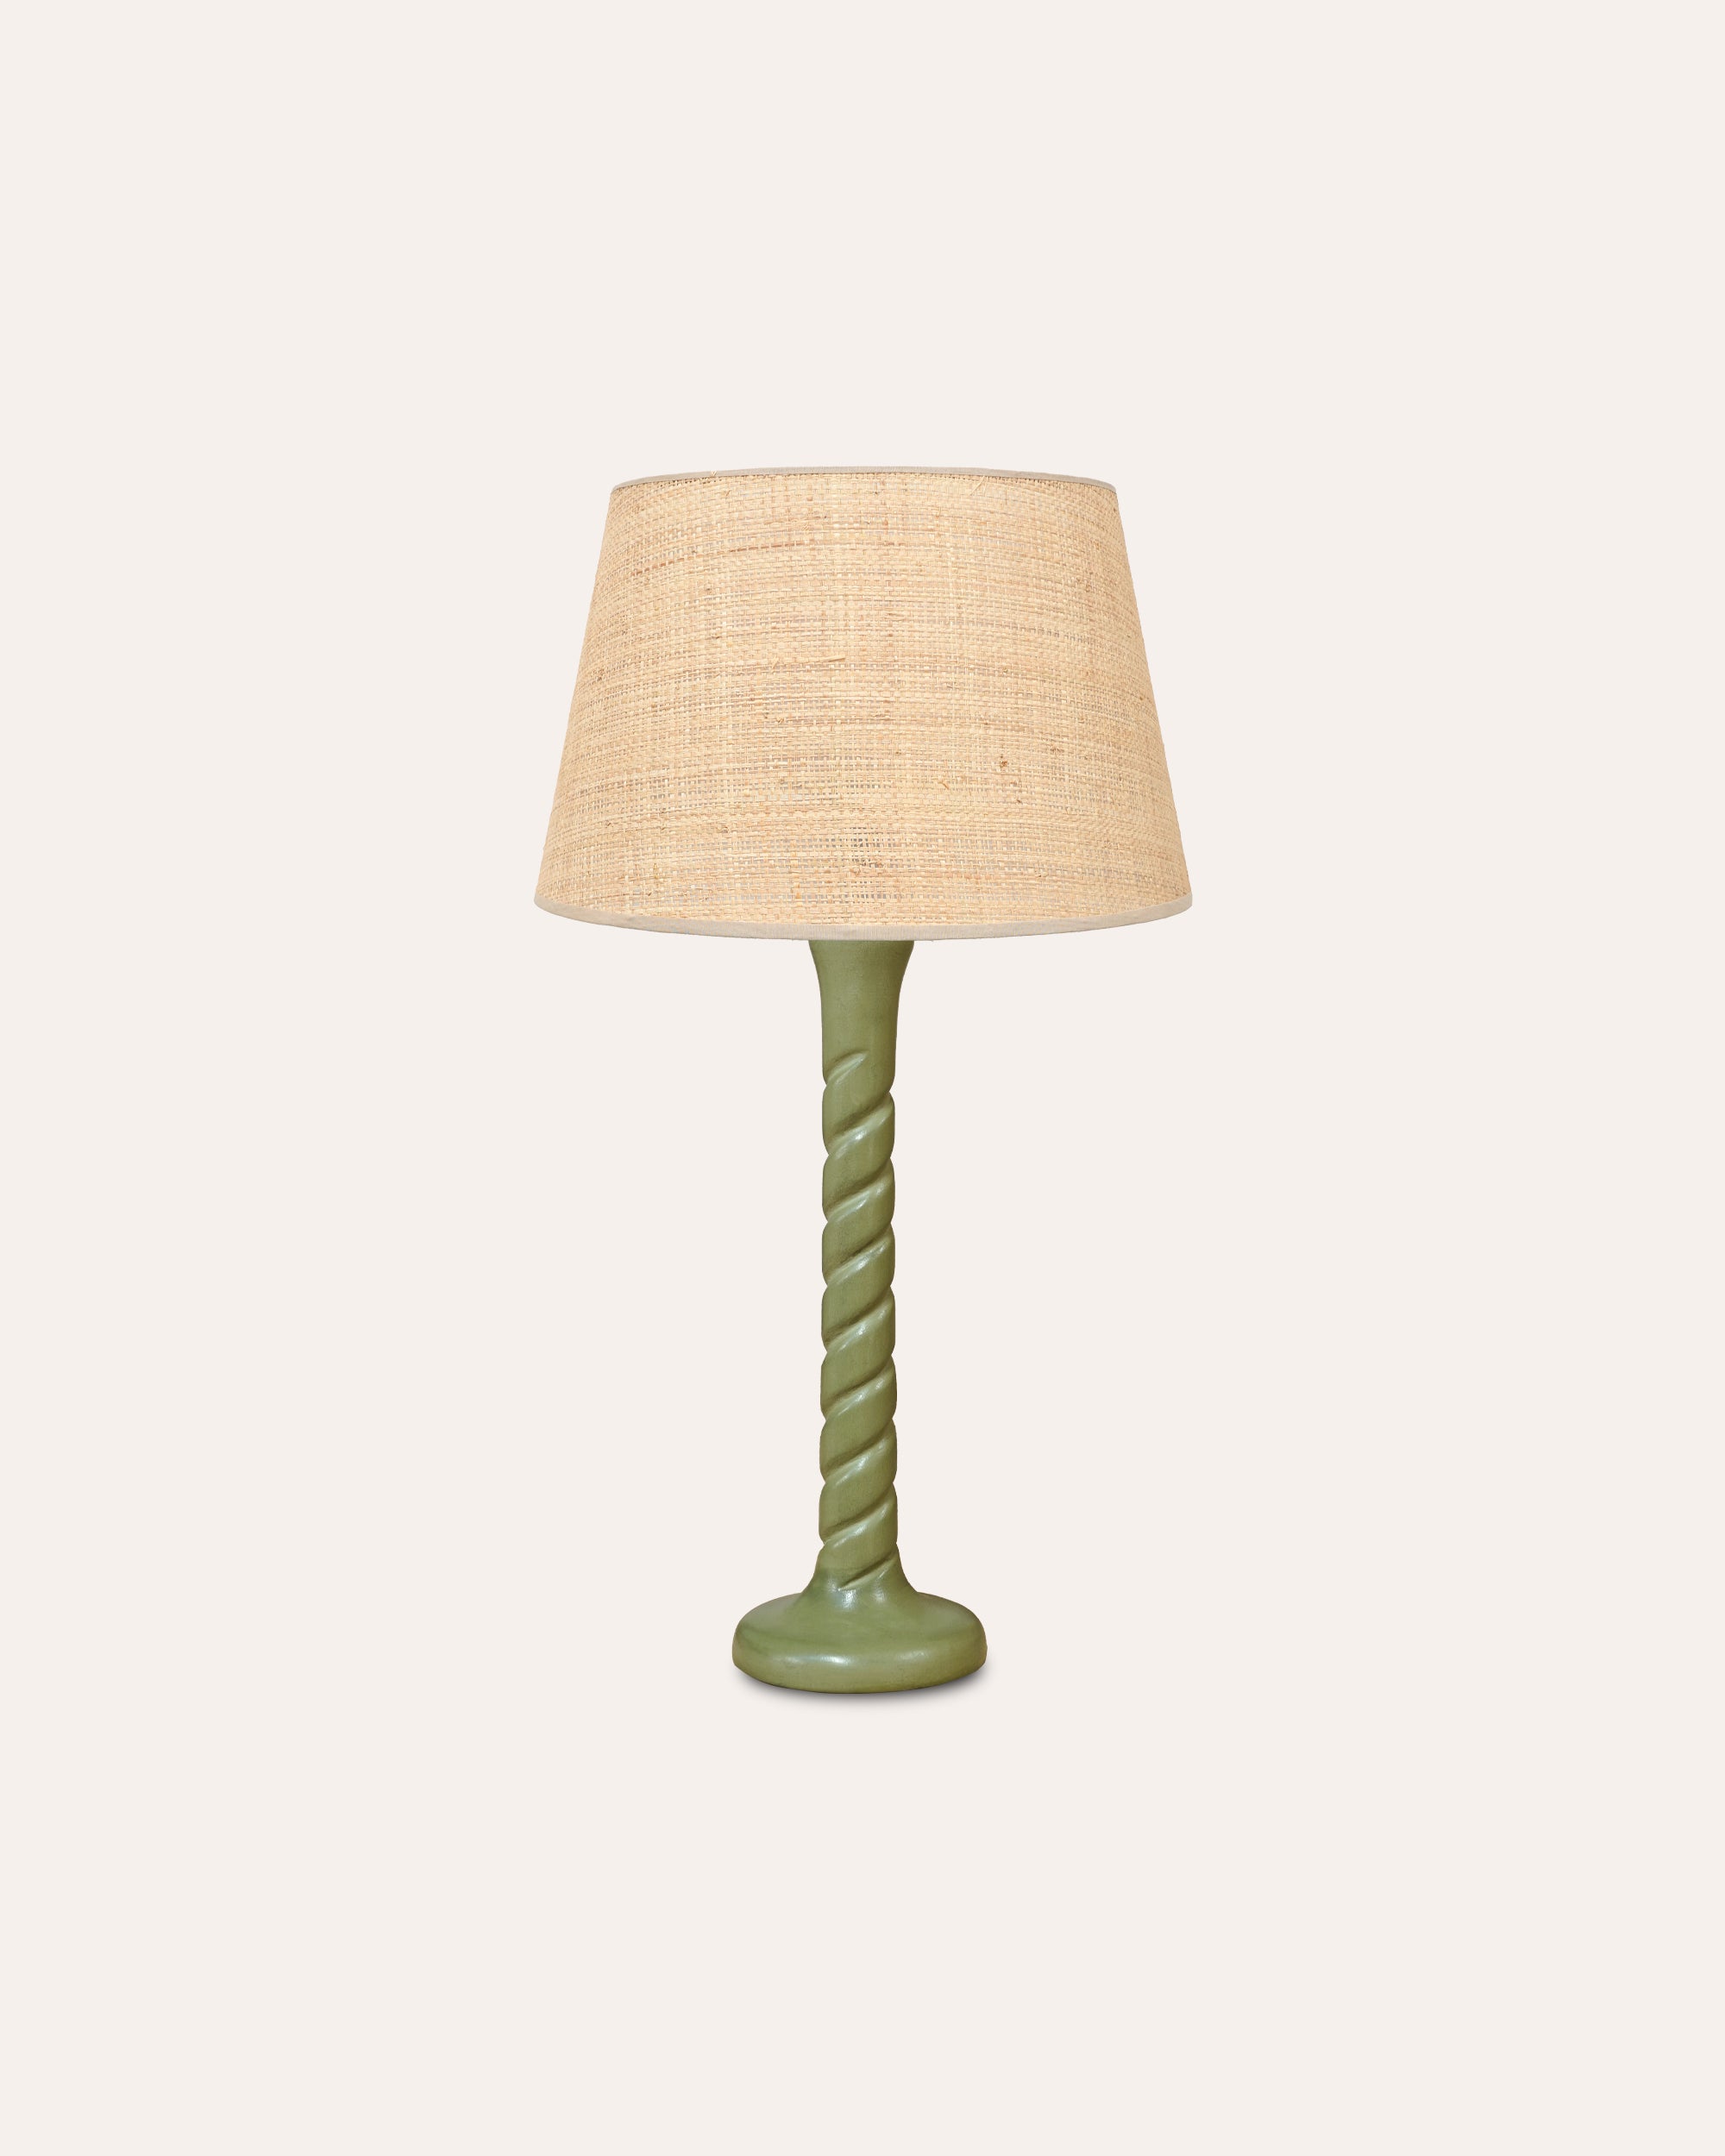 Small Twisted Wooden Table Lamp - Light Green